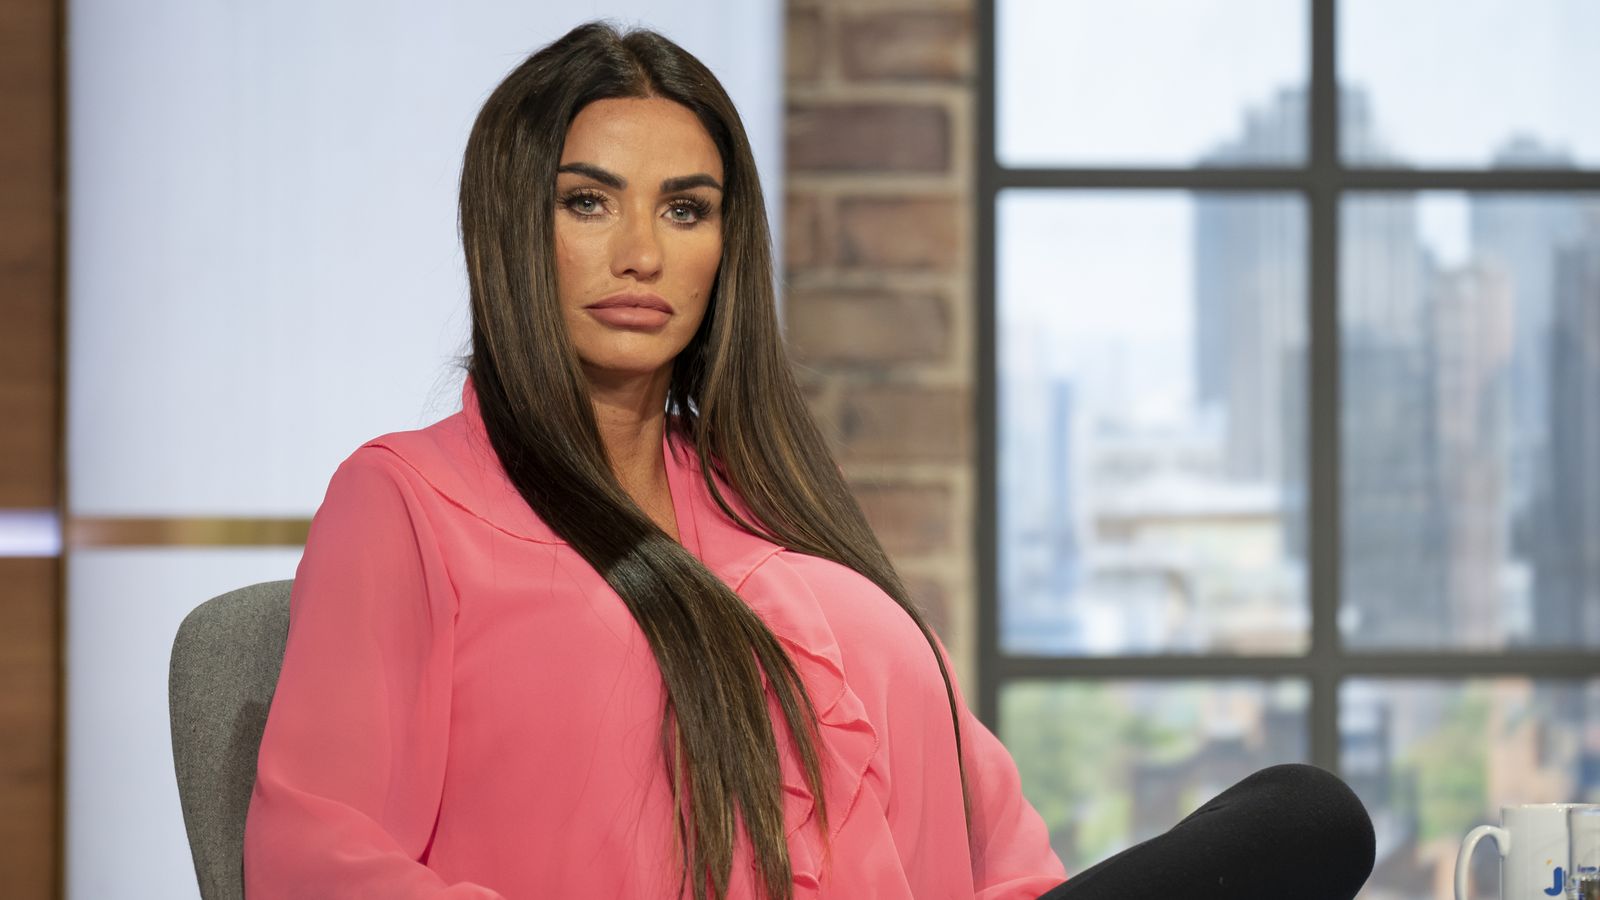 Katie Price declared bankrupt for second time